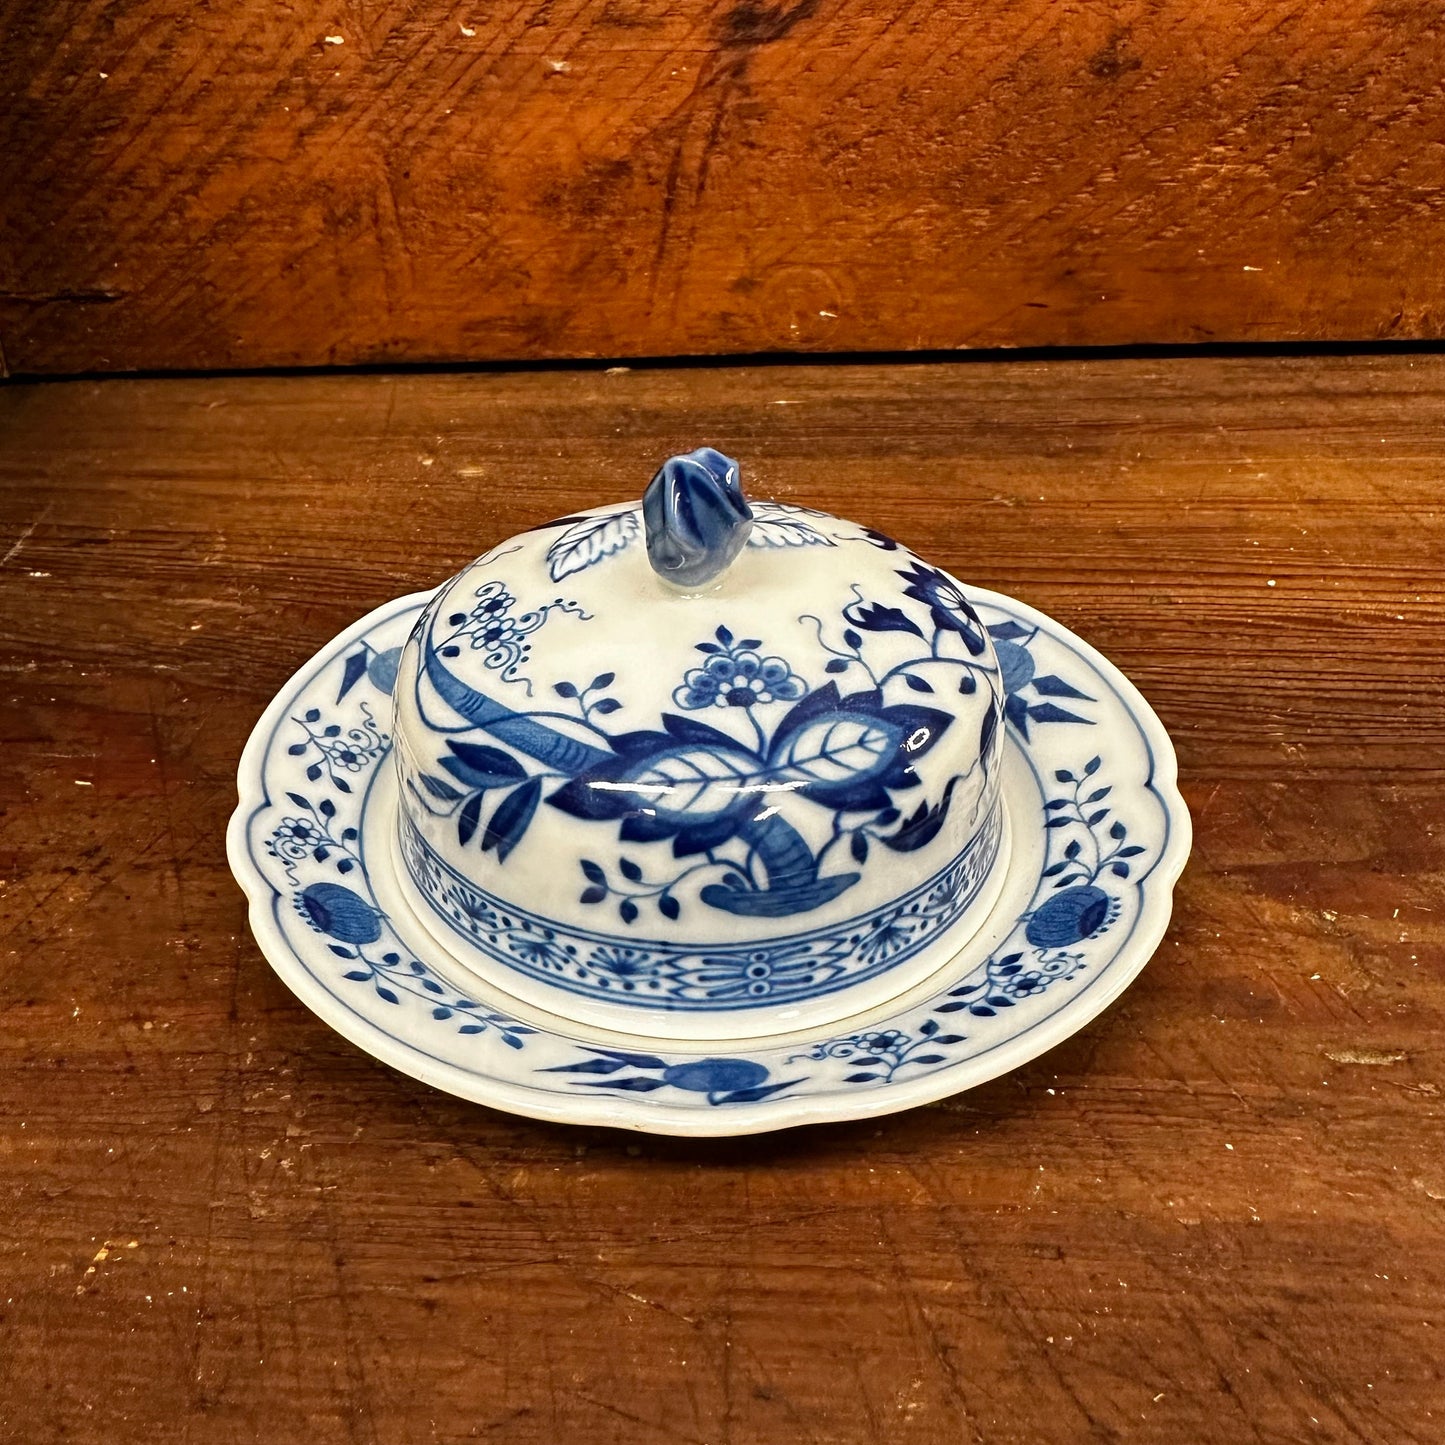 Covered Butter Dish Blue Onion Ceramic 1108 Bavaria Germany